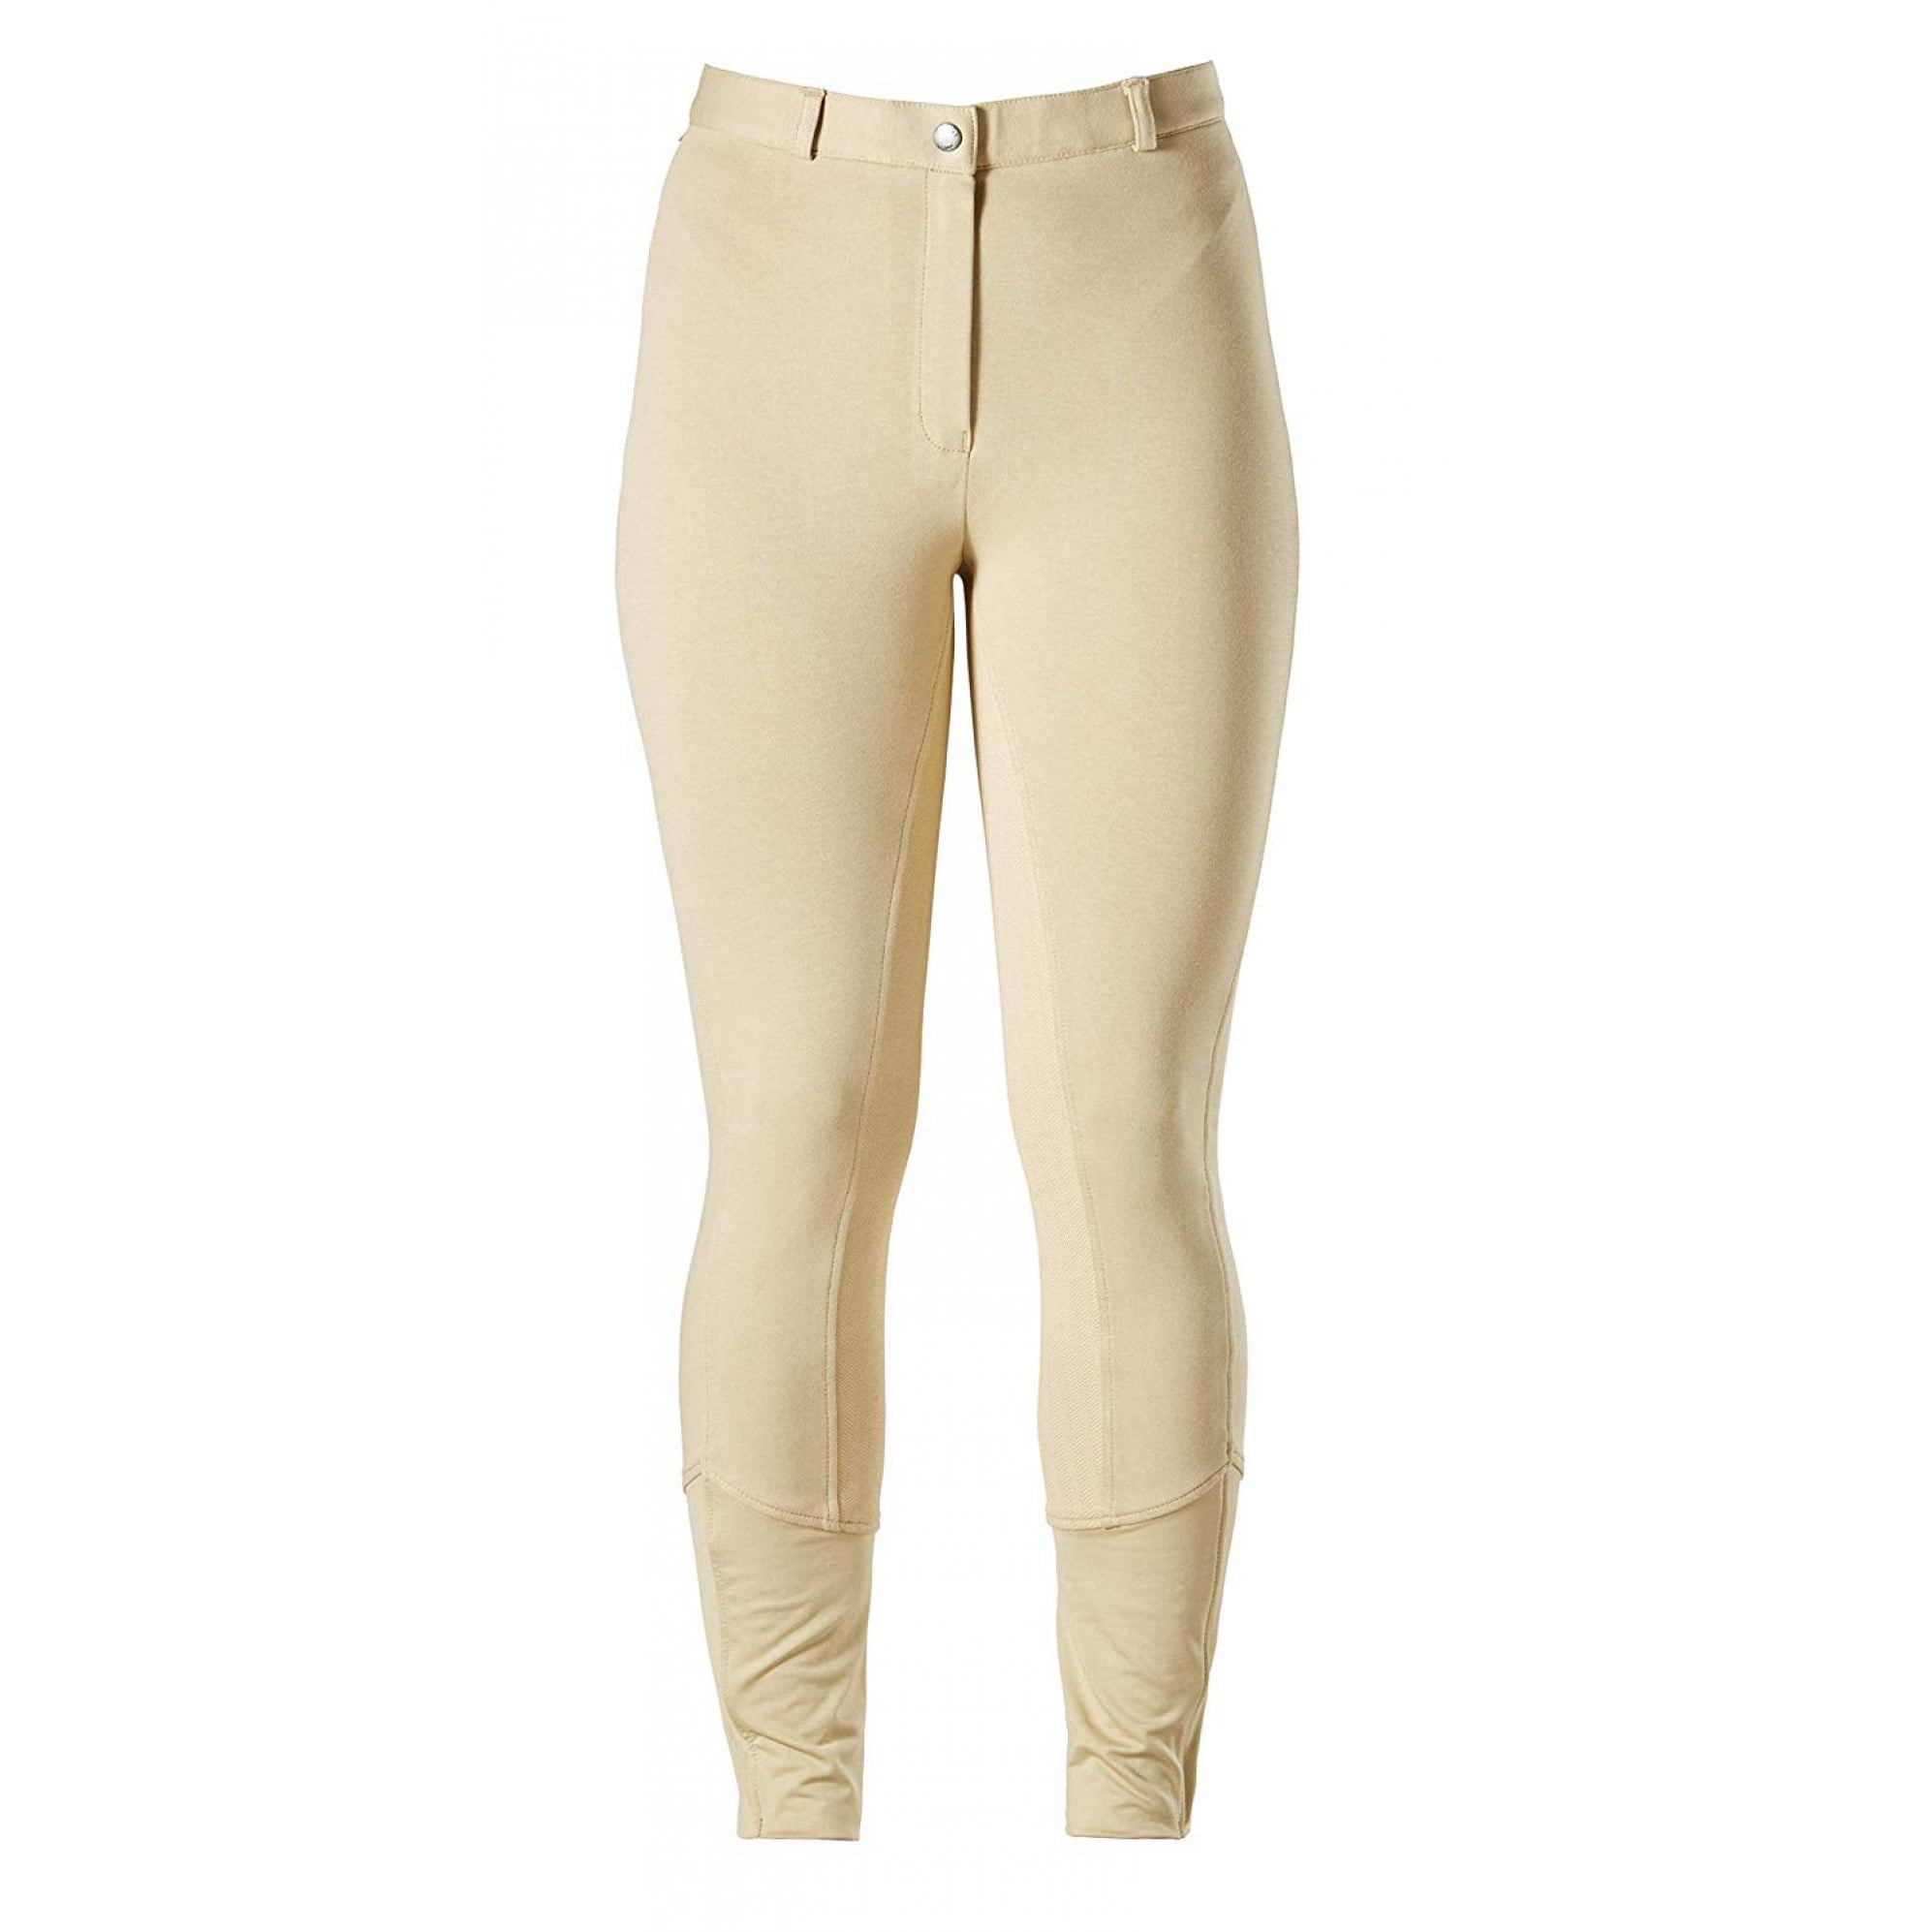 30 Inch Harry Hall Womenss Womens Chester Sticky Bum Long Traditional Styled Jodhpurs-Beige